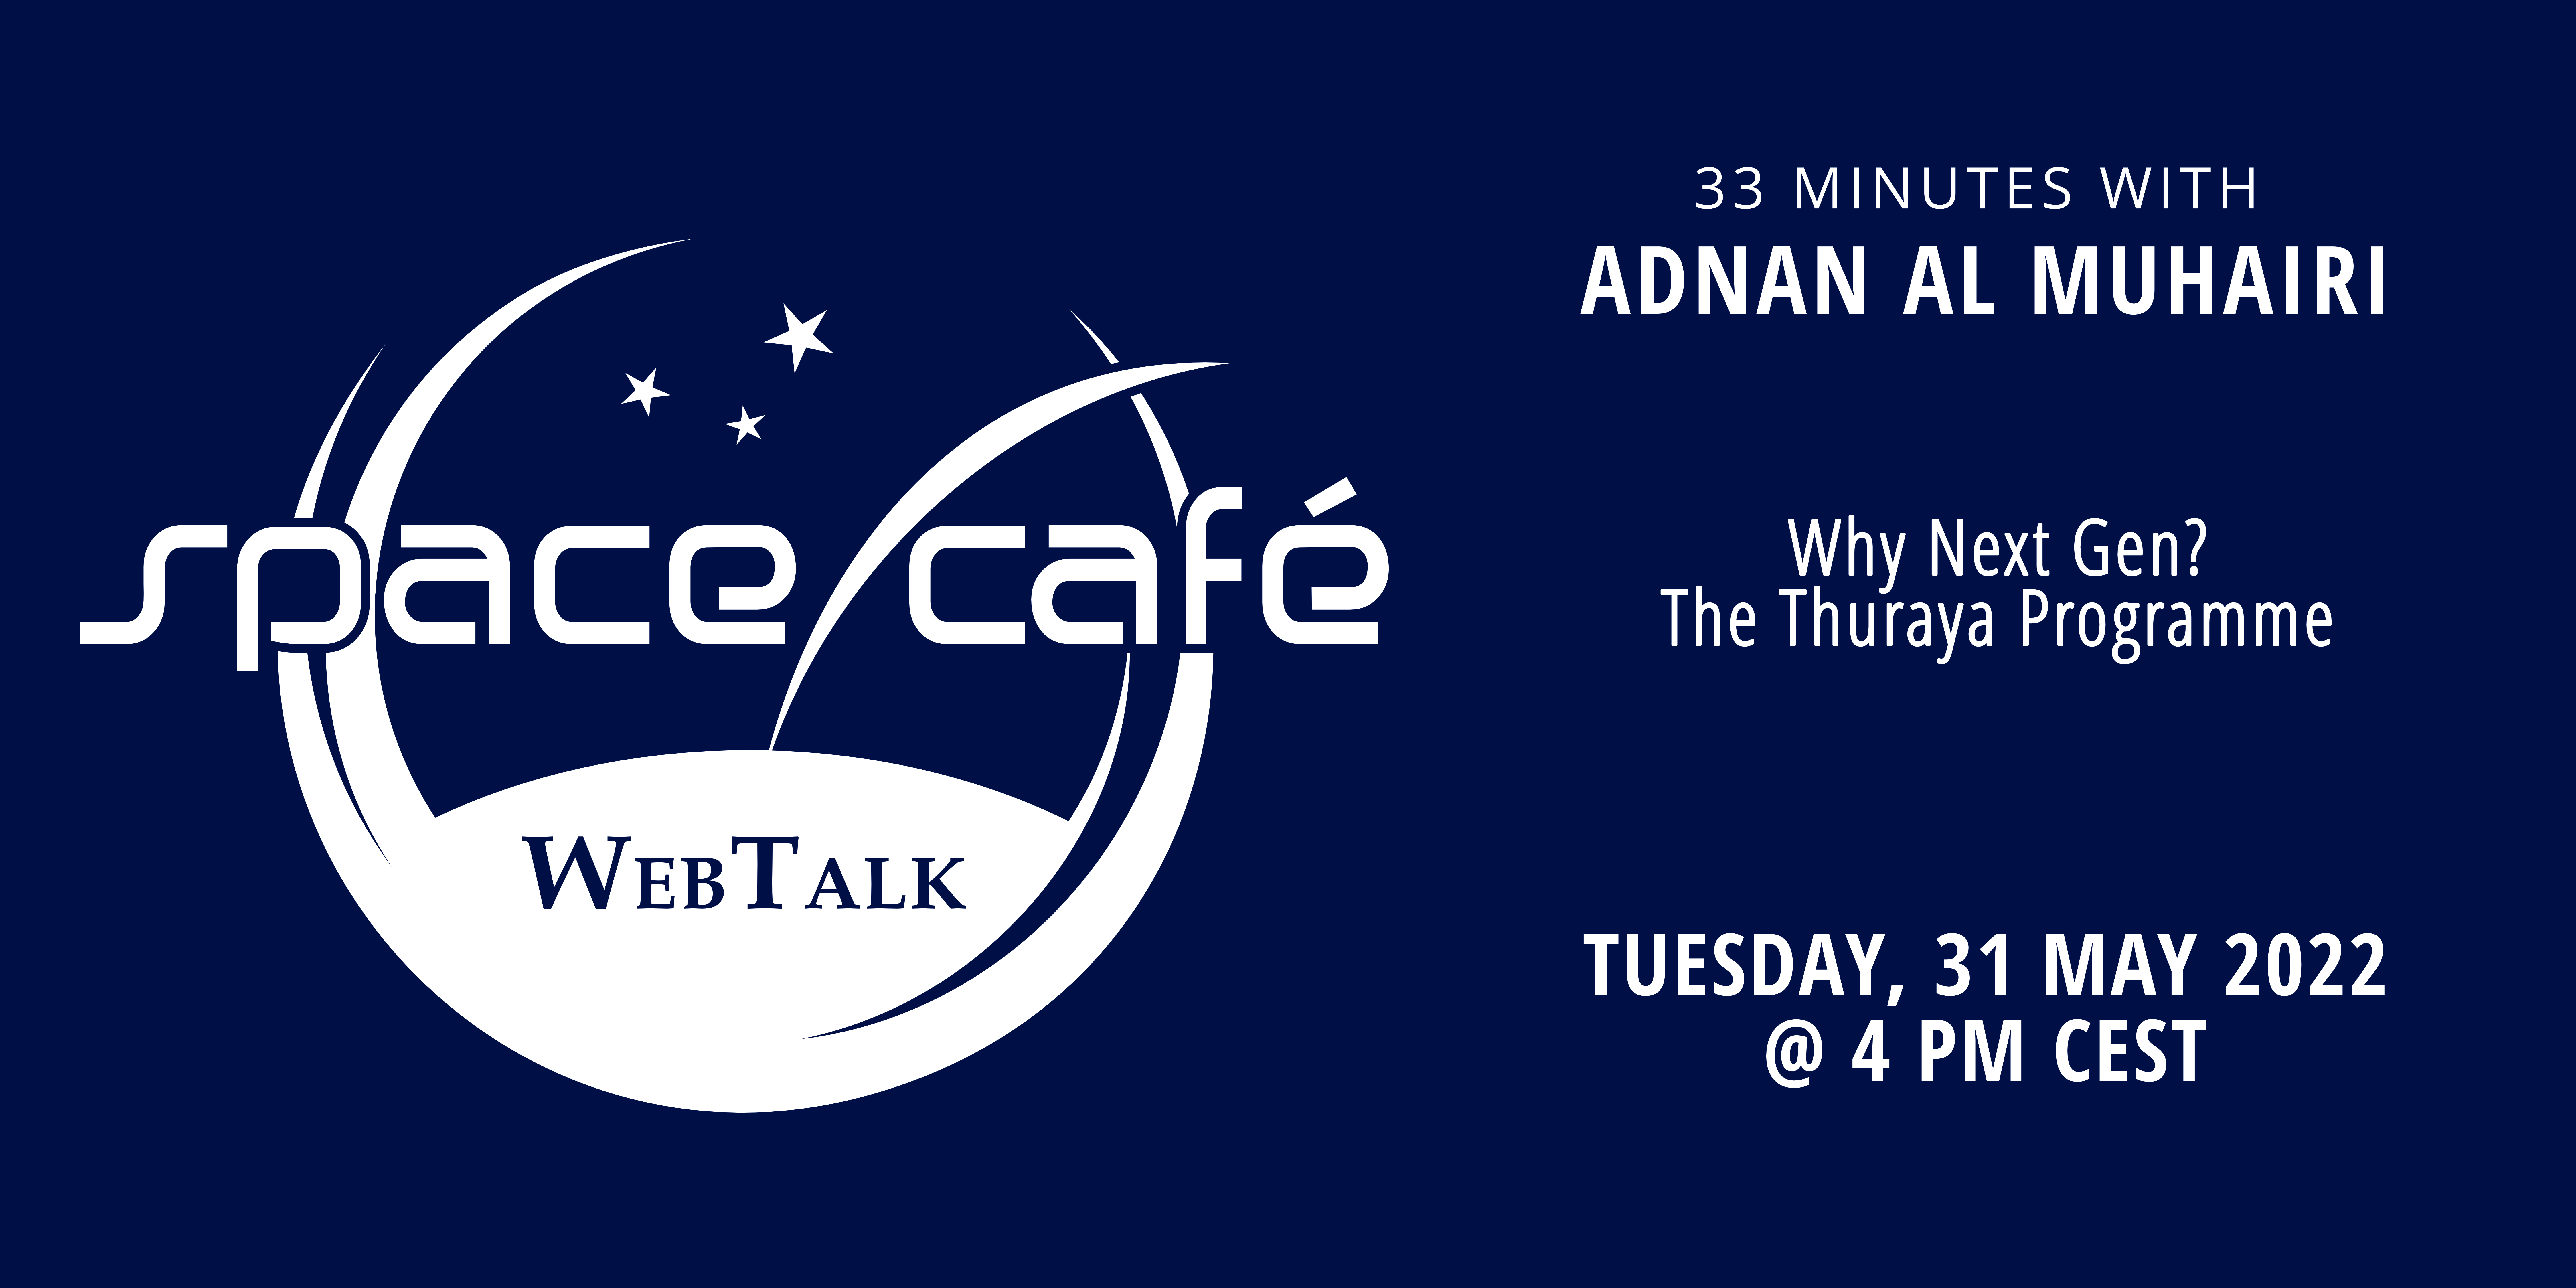 Register Today For Our Space Café “33 minutes with Adnan Al Muhairi” On 31 May 2022